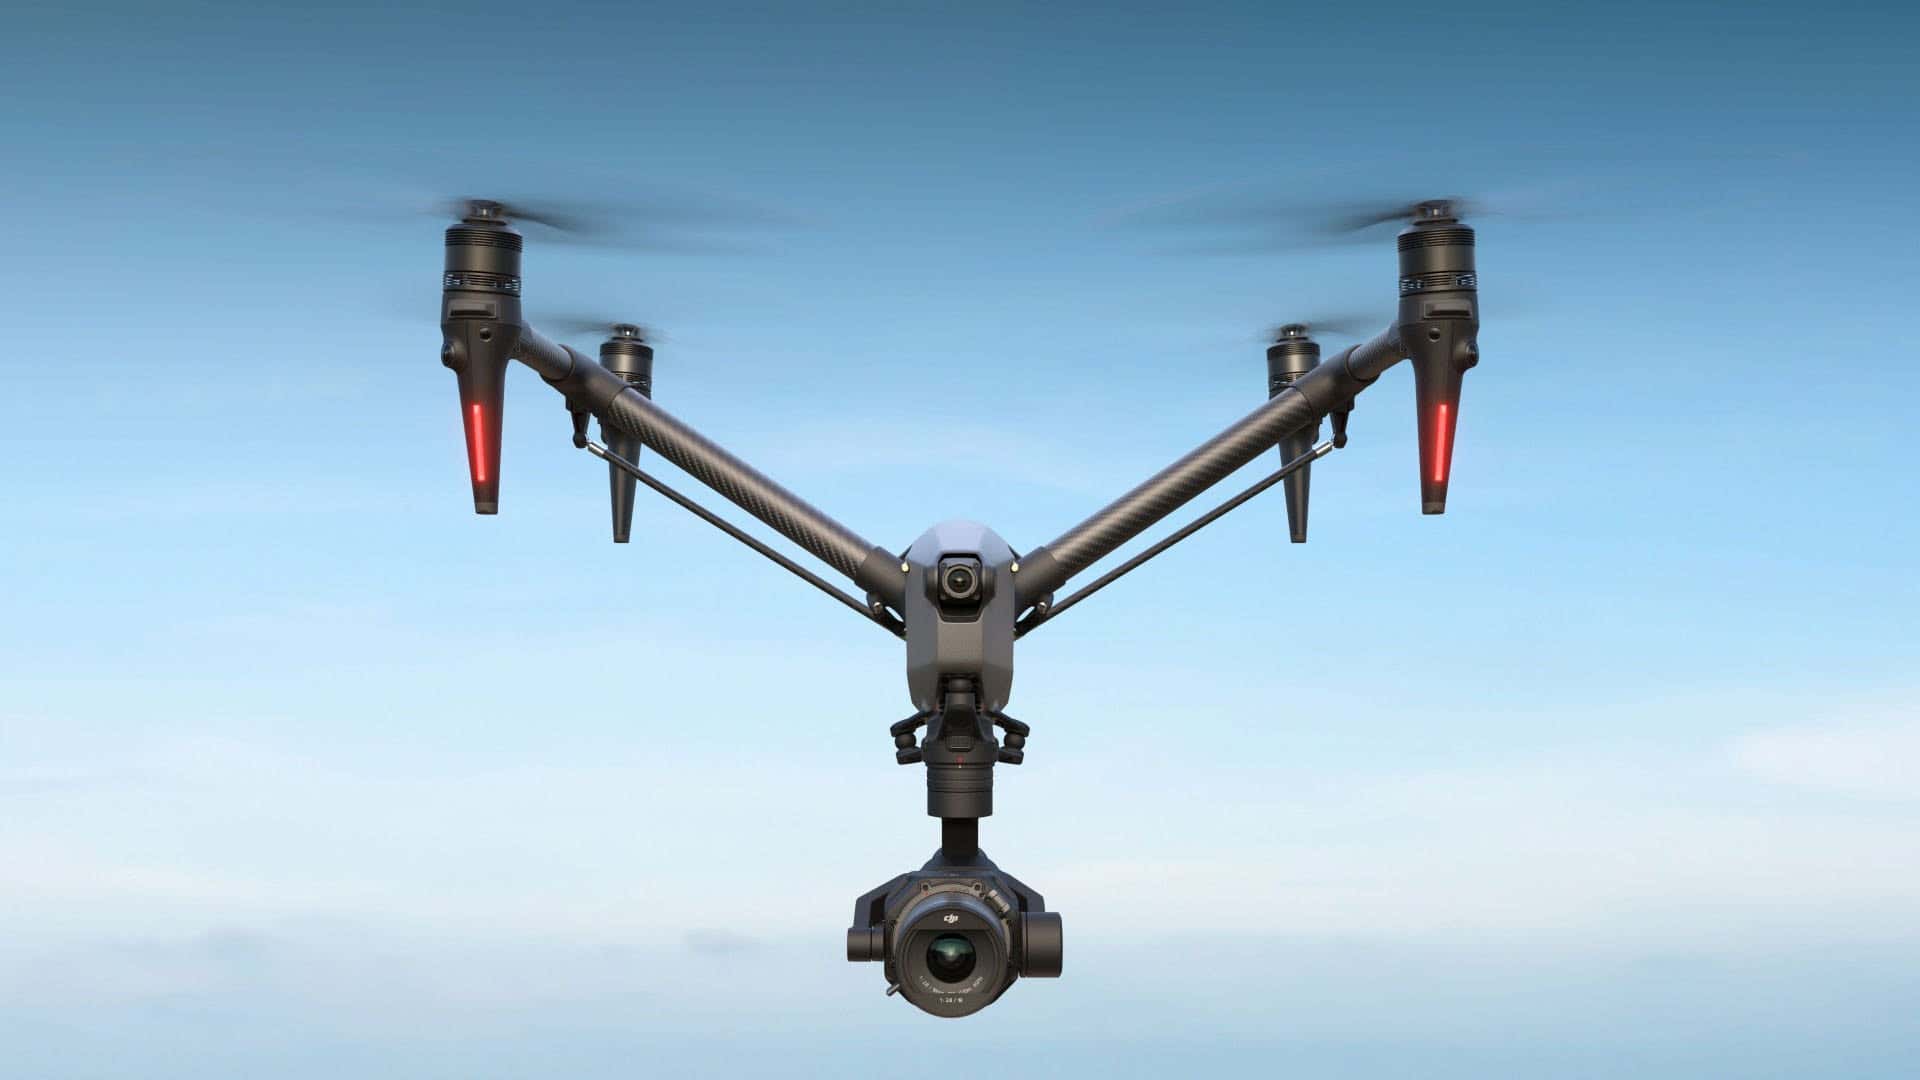 DJI Inspire 3 equipped with gimbal camera and FPV camera